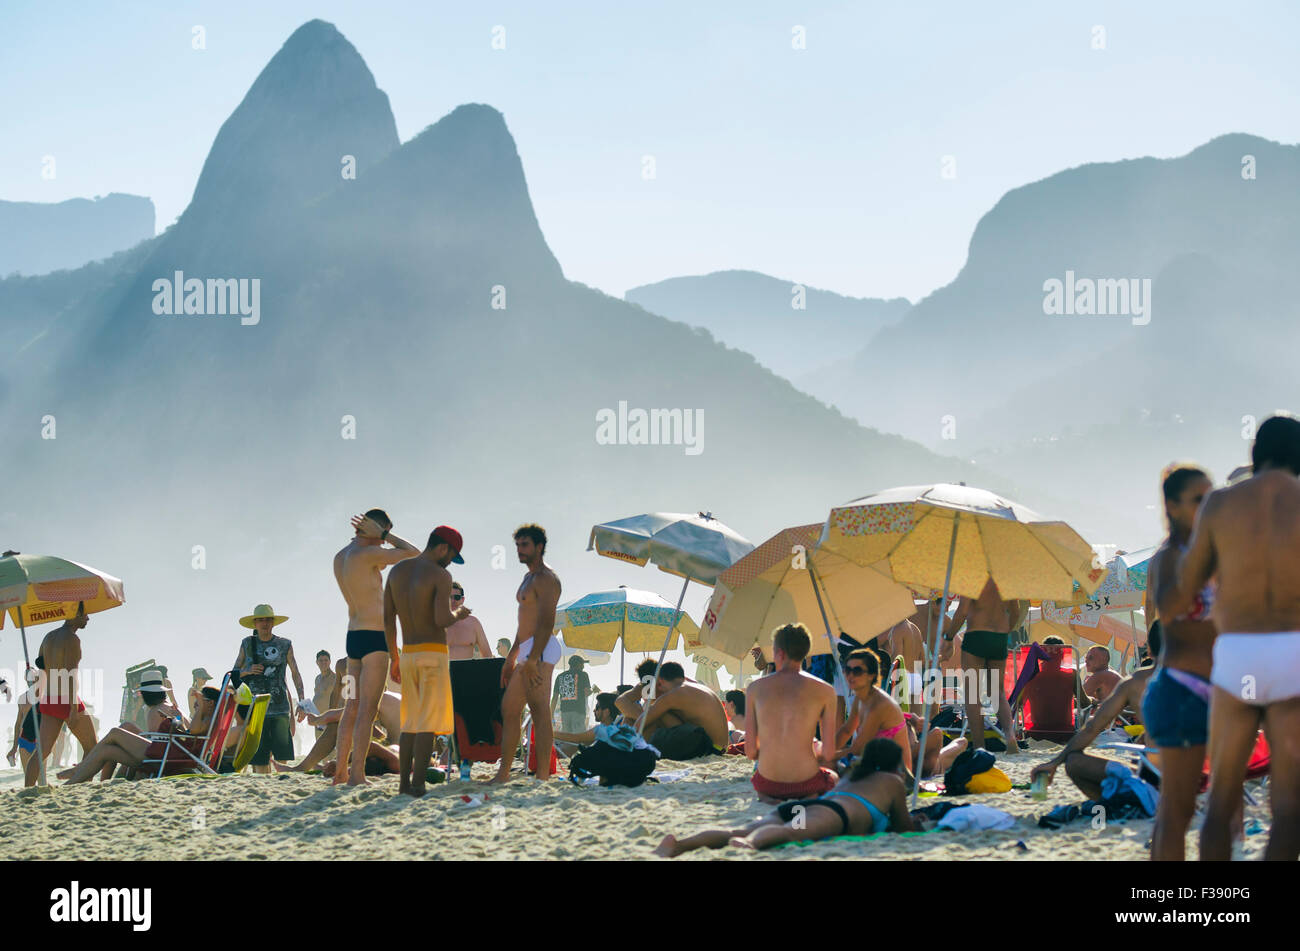 RIO DE JANEIRO, BRAZIL - JANUARY 20, 2013: Locals and visitors crowd Ipanema Beach against the iconic Two Brothers Mountain. Stock Photo